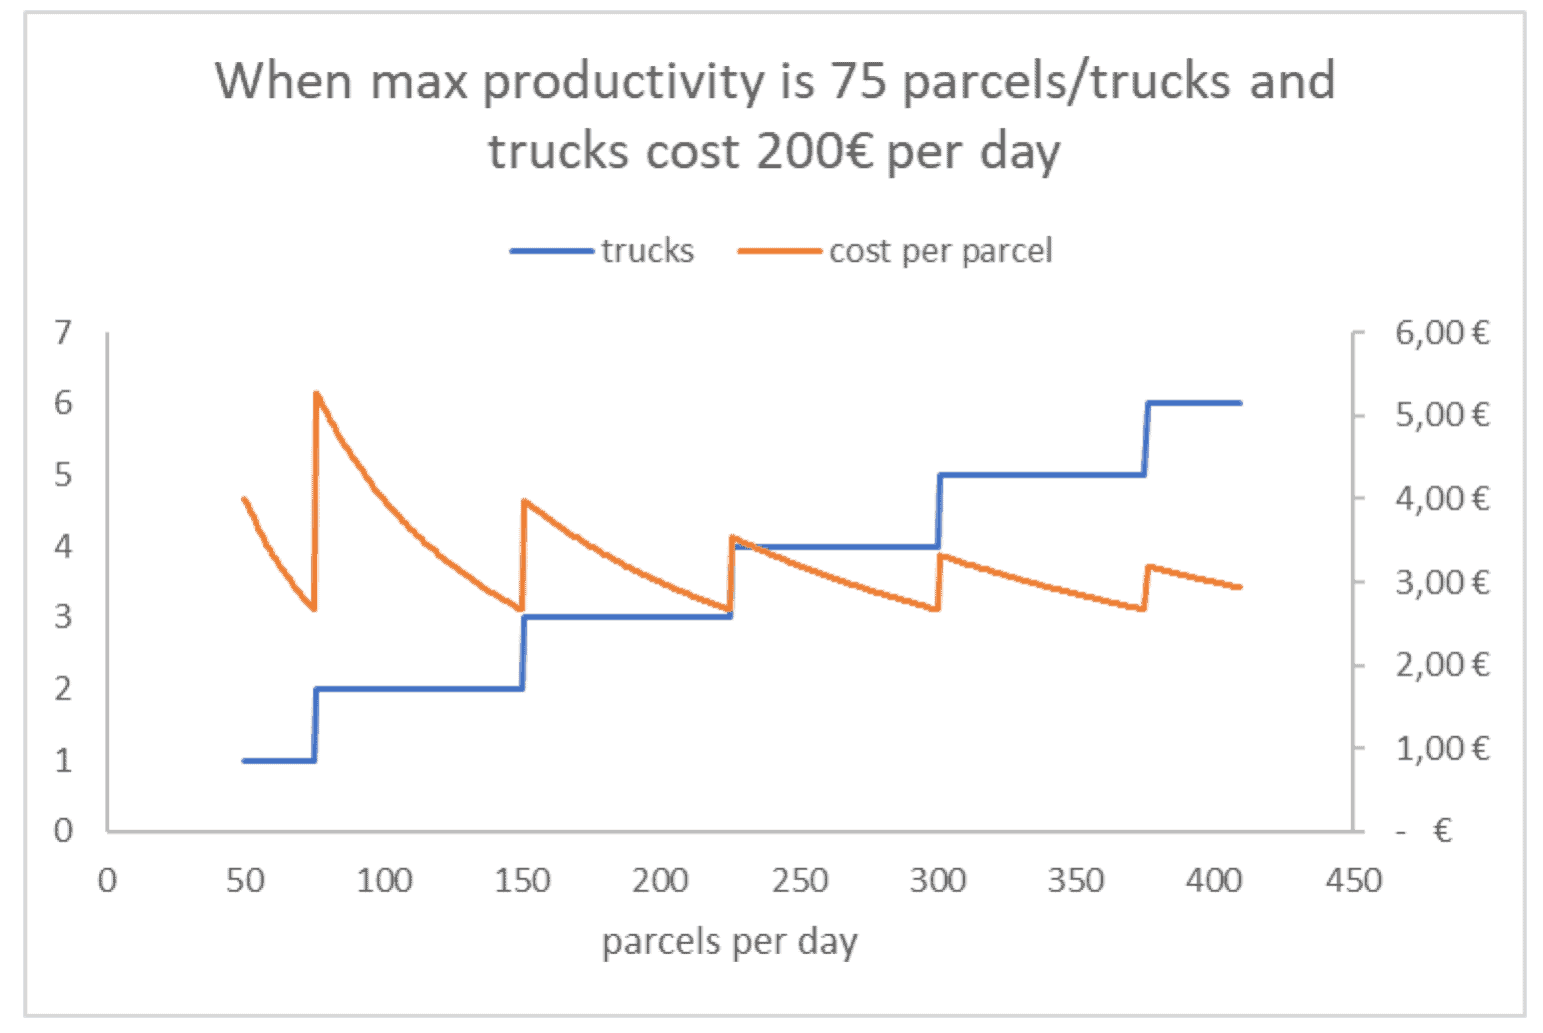 Parcels per day and costs